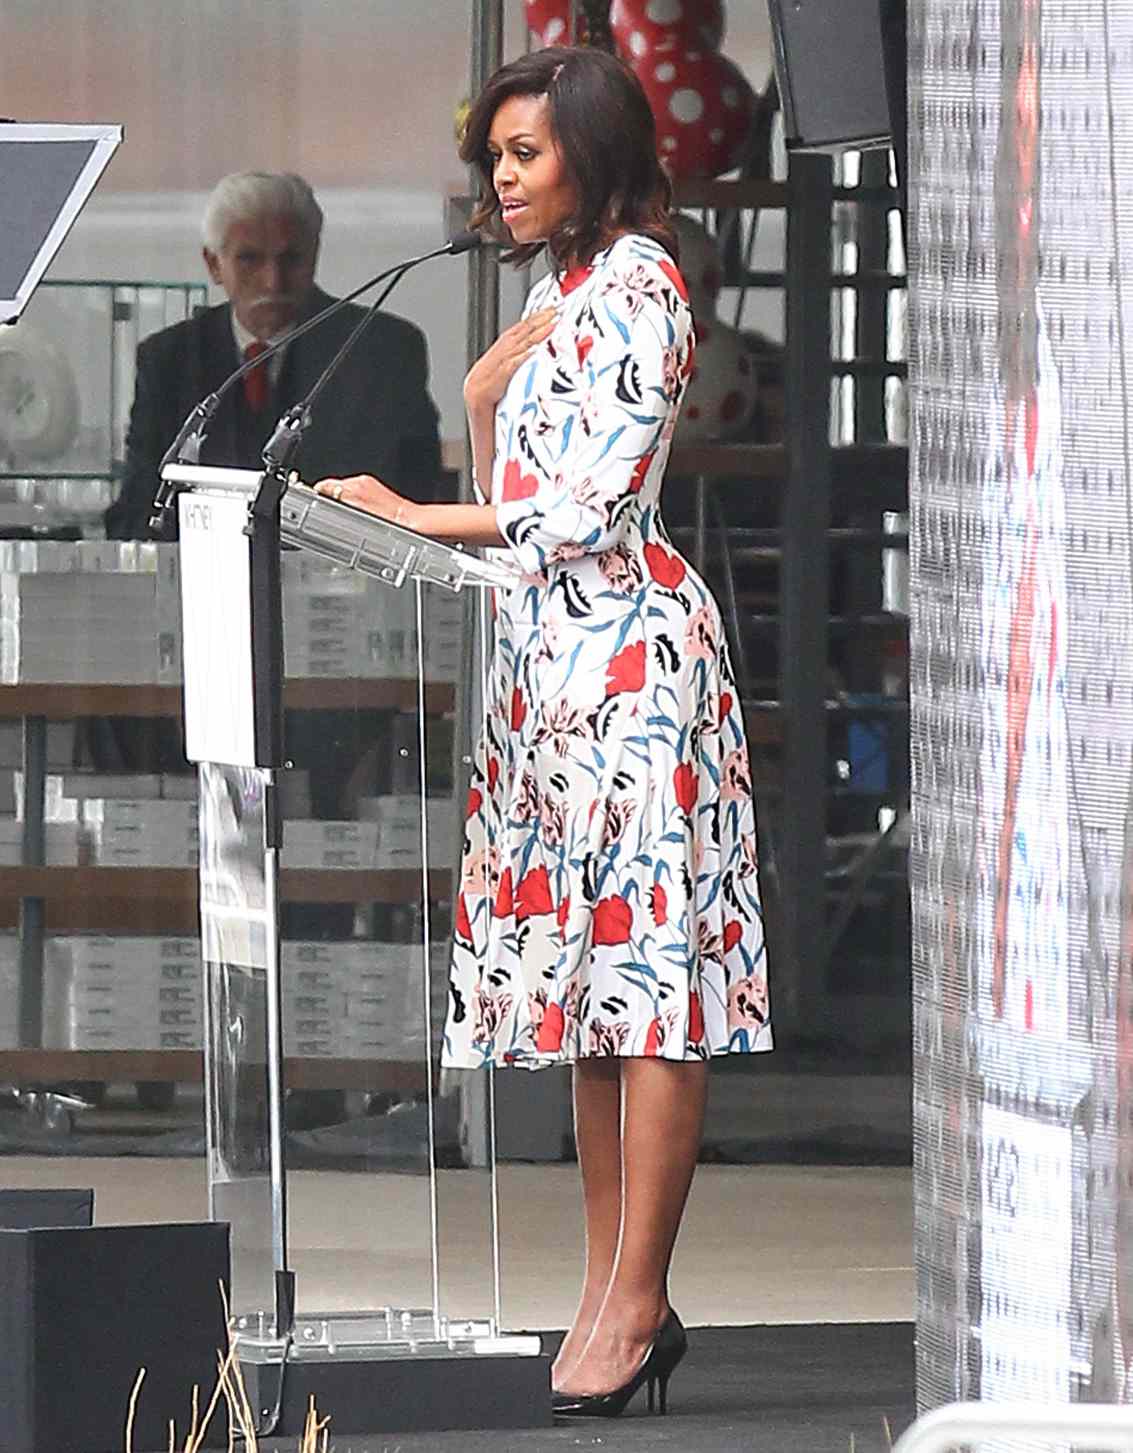 Michelle Obama speaks at the opening of the new Whitney Museum